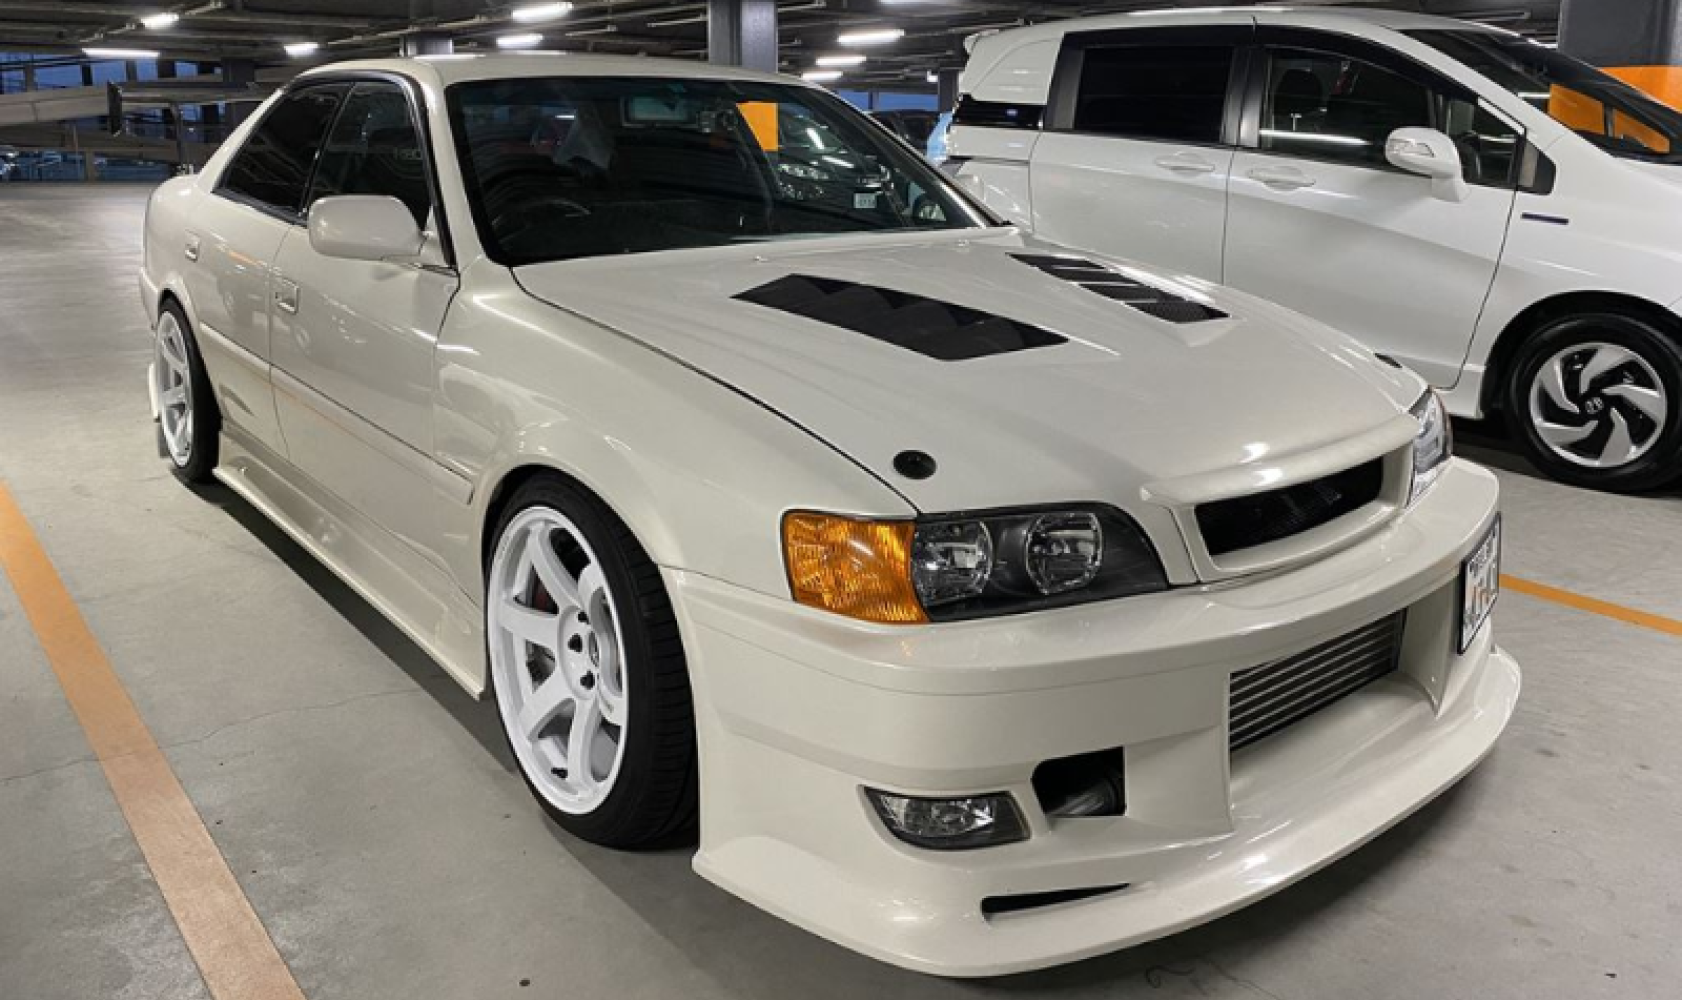 JZX100 Toyta Chaser 1996 White Imported JDM